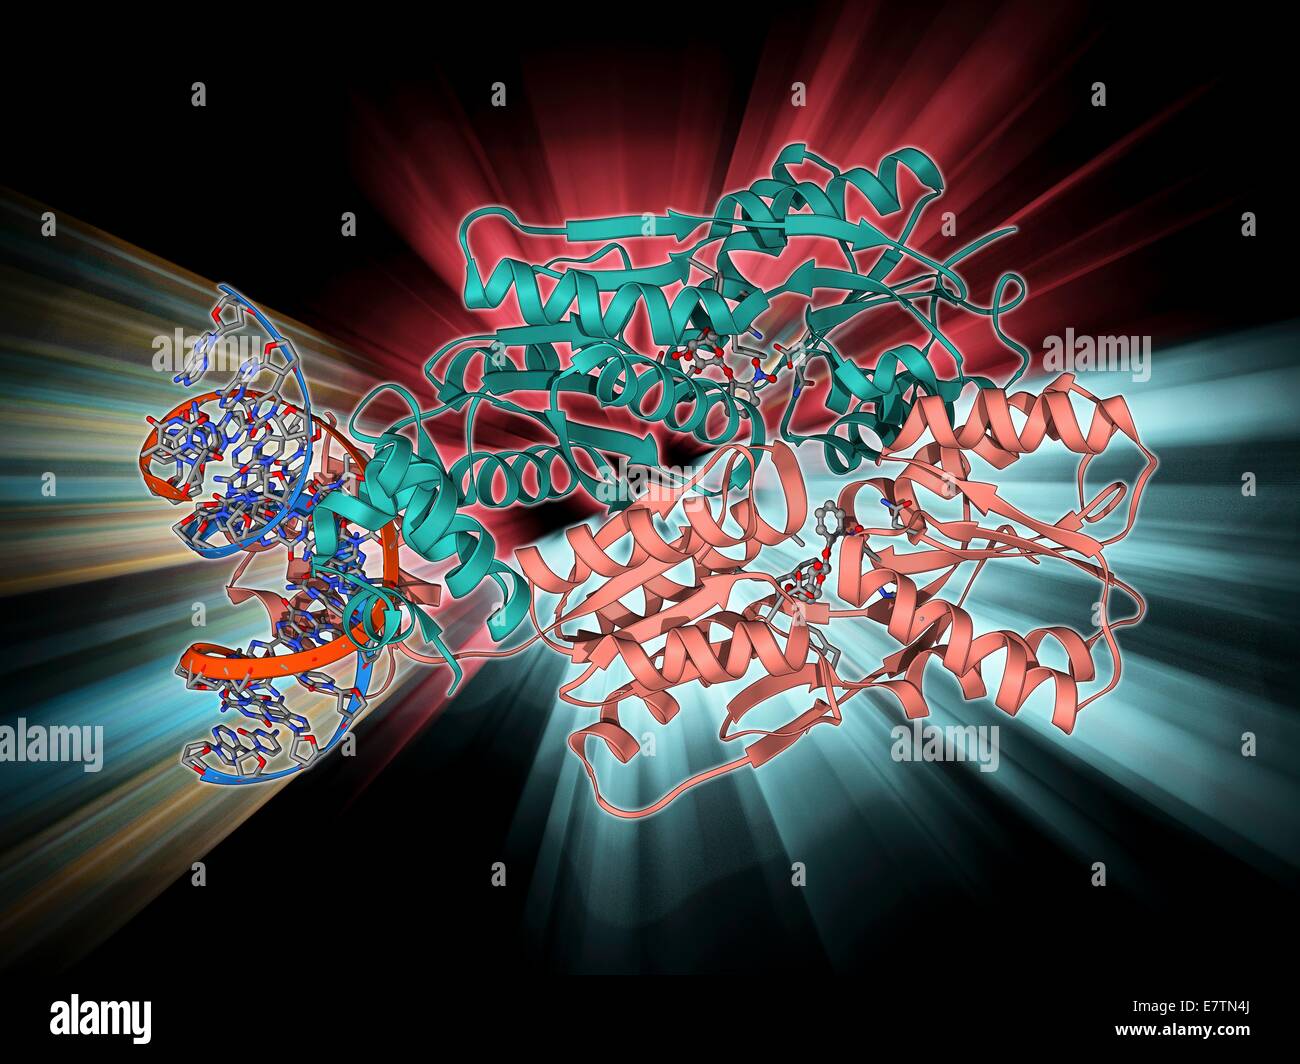 LAC repressor bound to DNA. Molecular model of a LAC (lactose) repressor molecule (pink and turquoise) interacting with bacterial DNA (deoxyribonucleic acid, red and blue). The LAC repressor inhibits the expression of genes that code for an enzyme which m Stock Photo